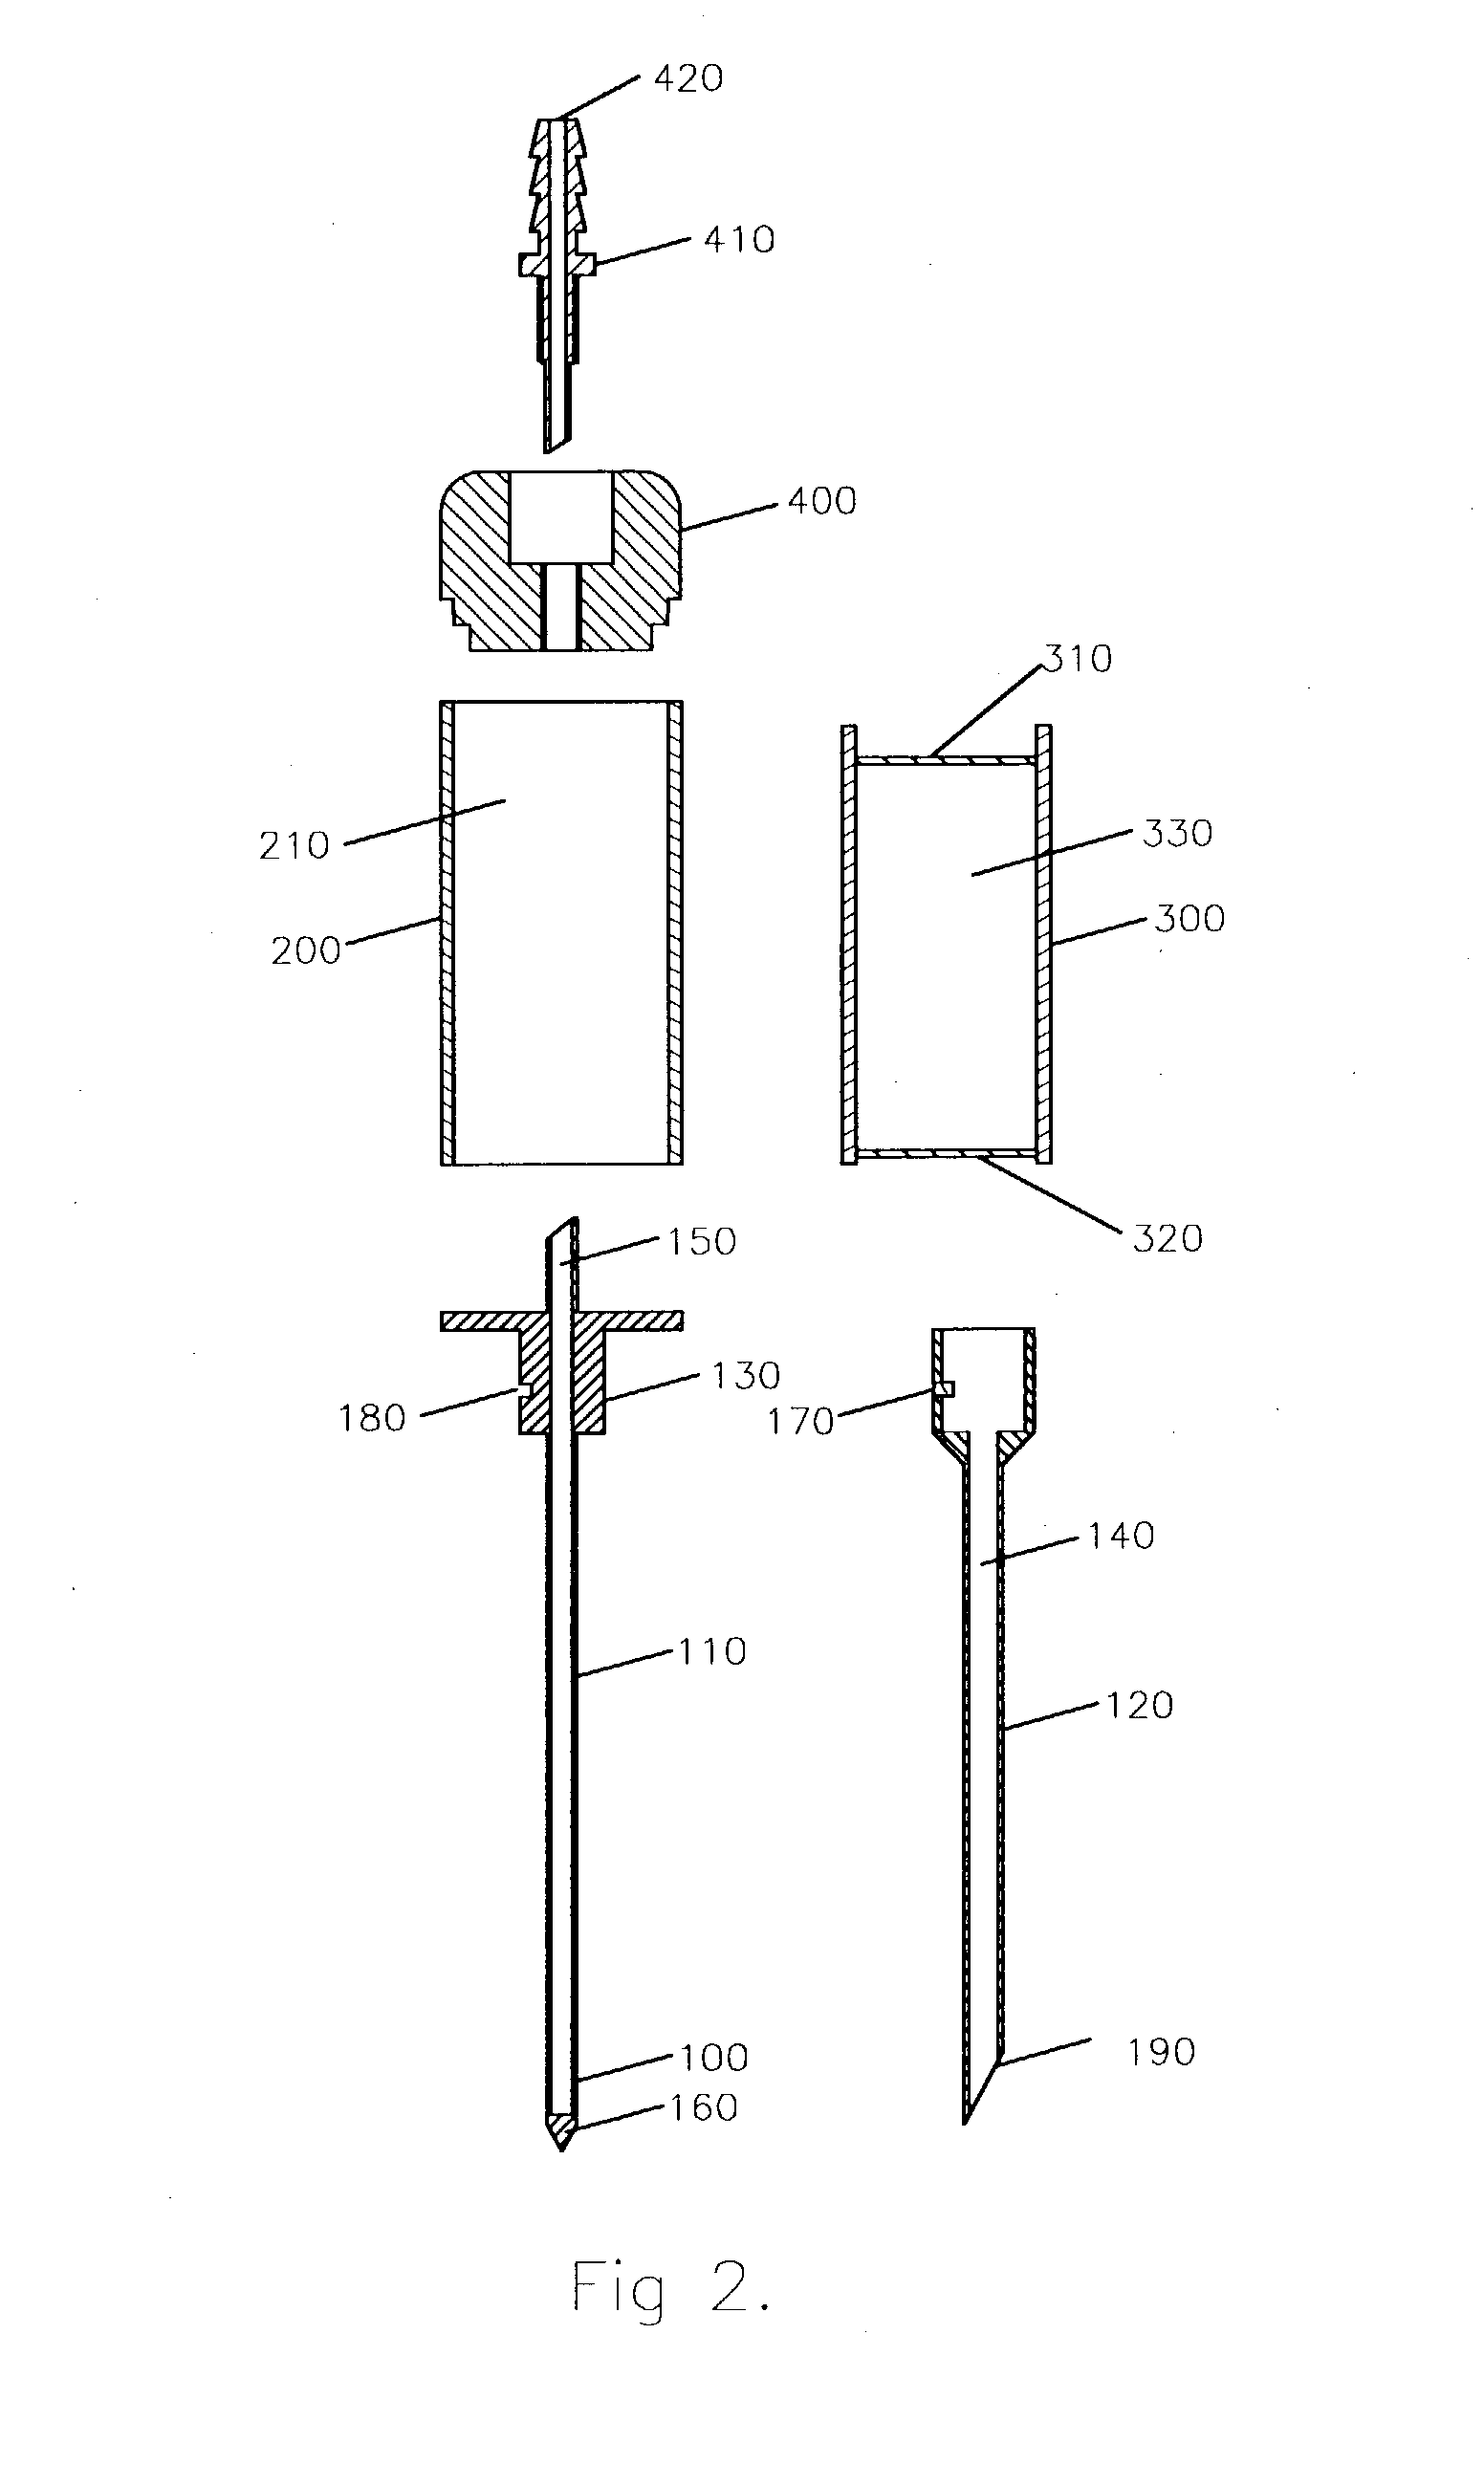 Bone marrow aspiration and biomaterial mixing system